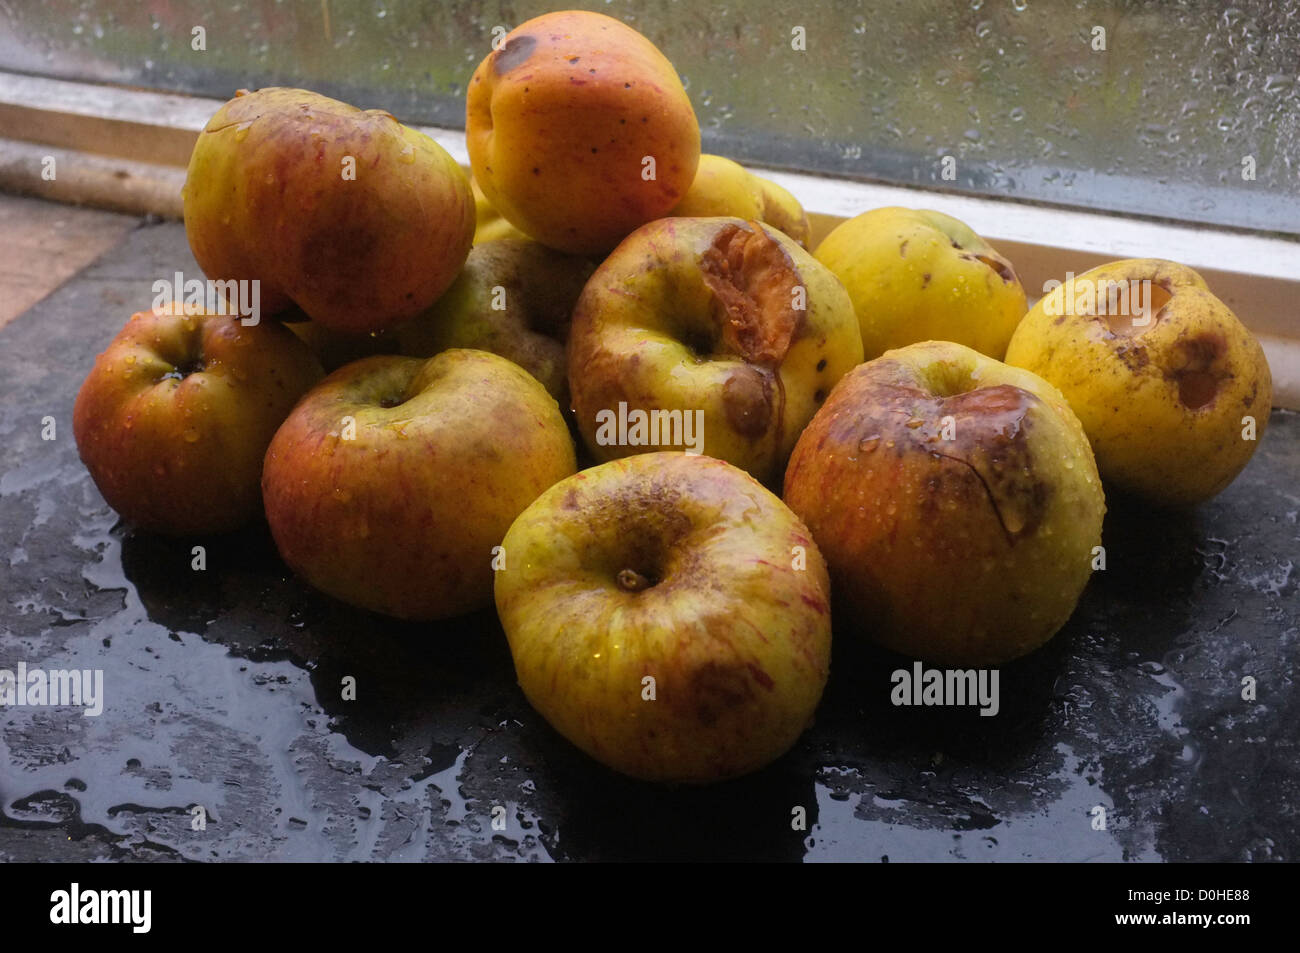 Windfall apples gathered together in the kitchen and showing some damage Stock Photo